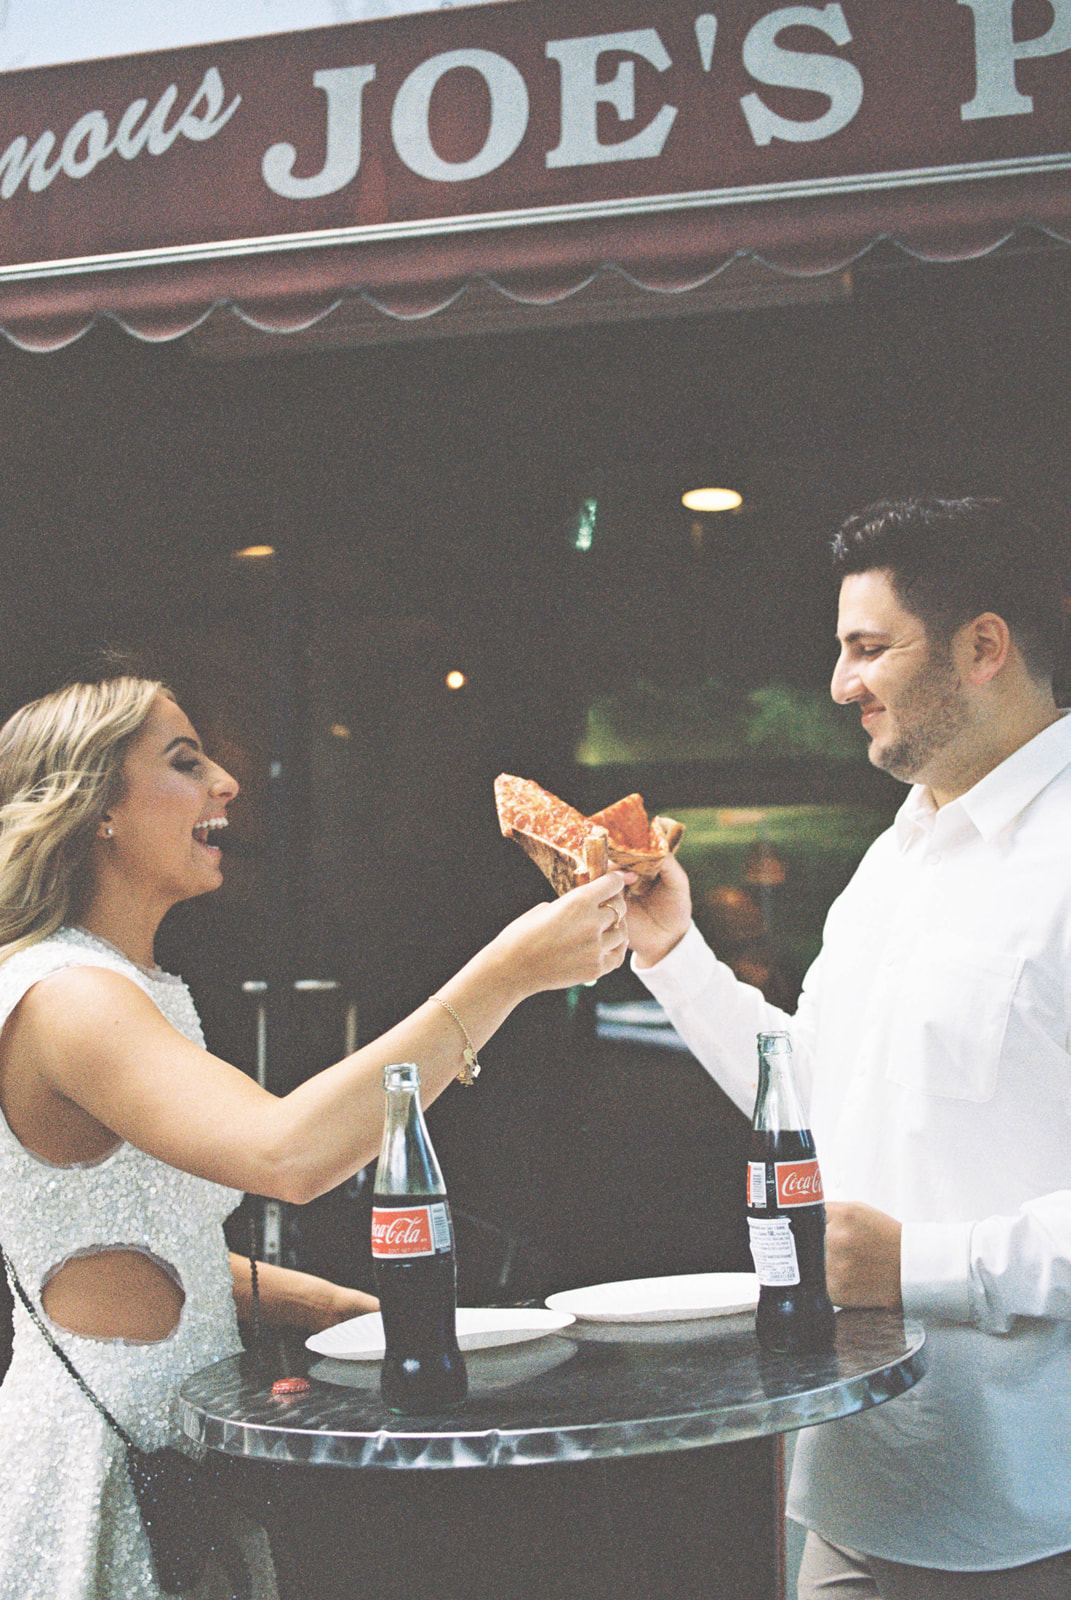 Couple's engagement session at Joe's Pizza in New York City. 